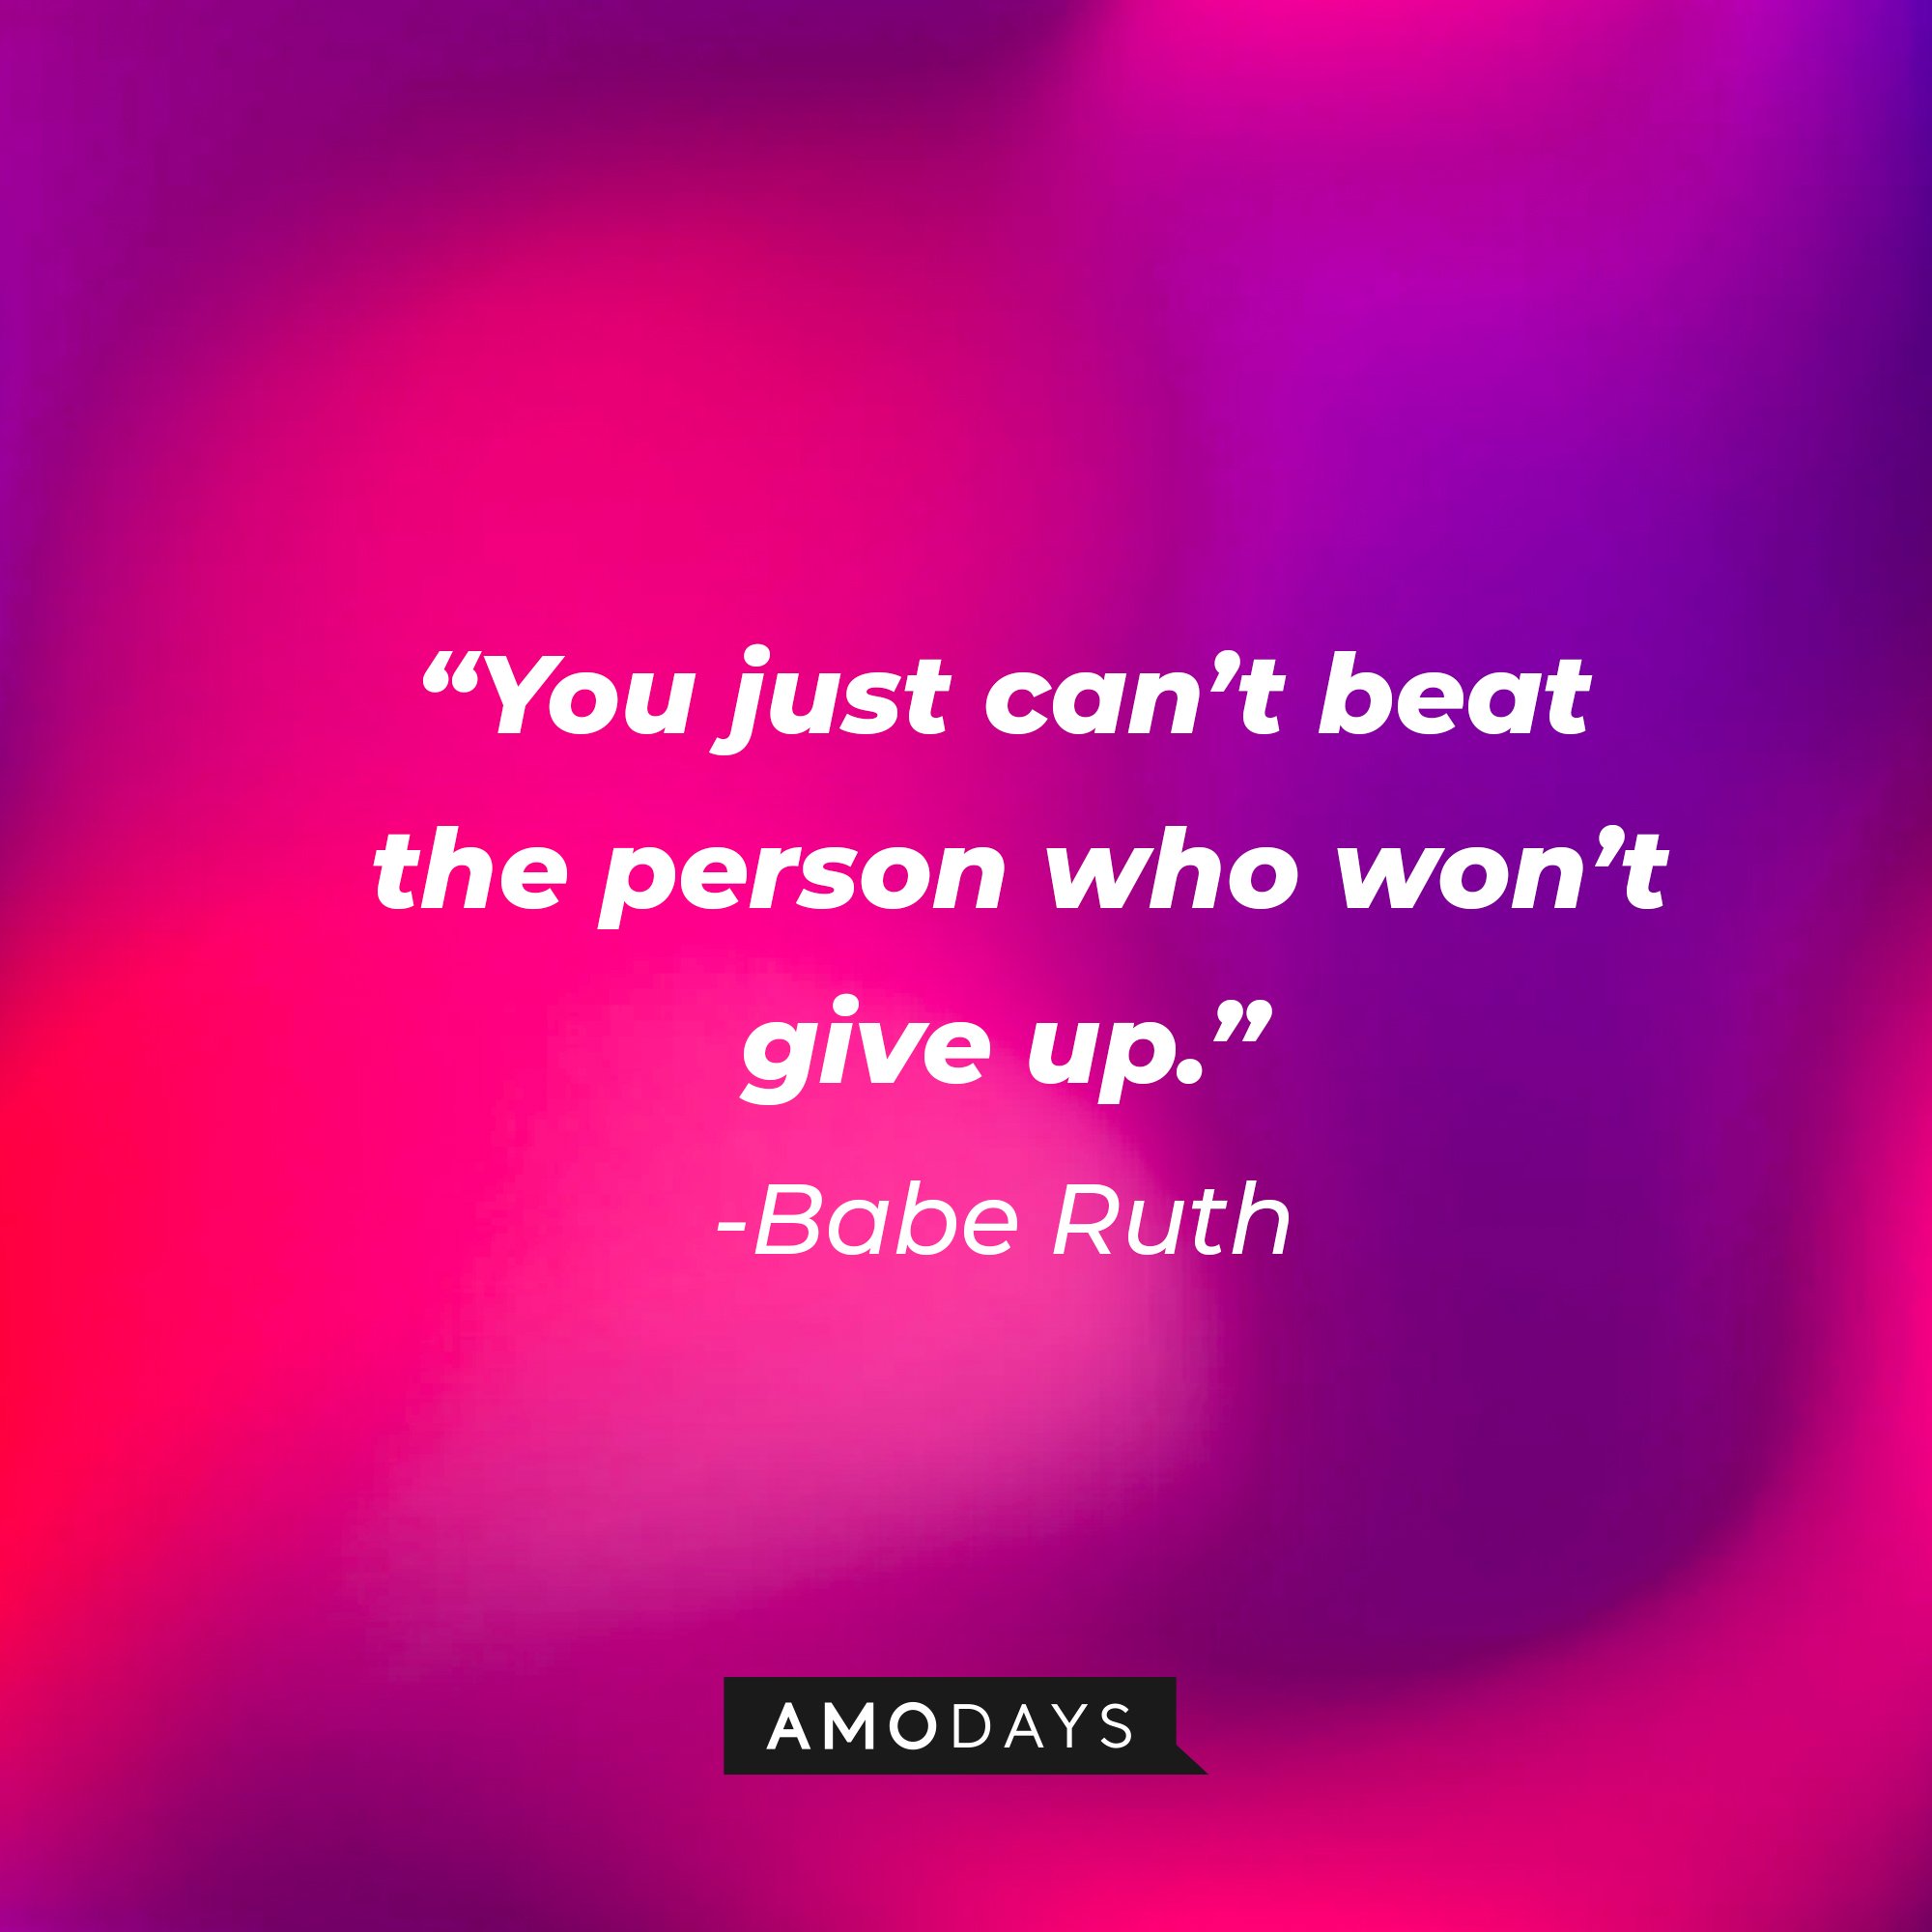 Babe Ruth’s quote: "You just can't beat the person who won’t give up.” | Image: AmoDays